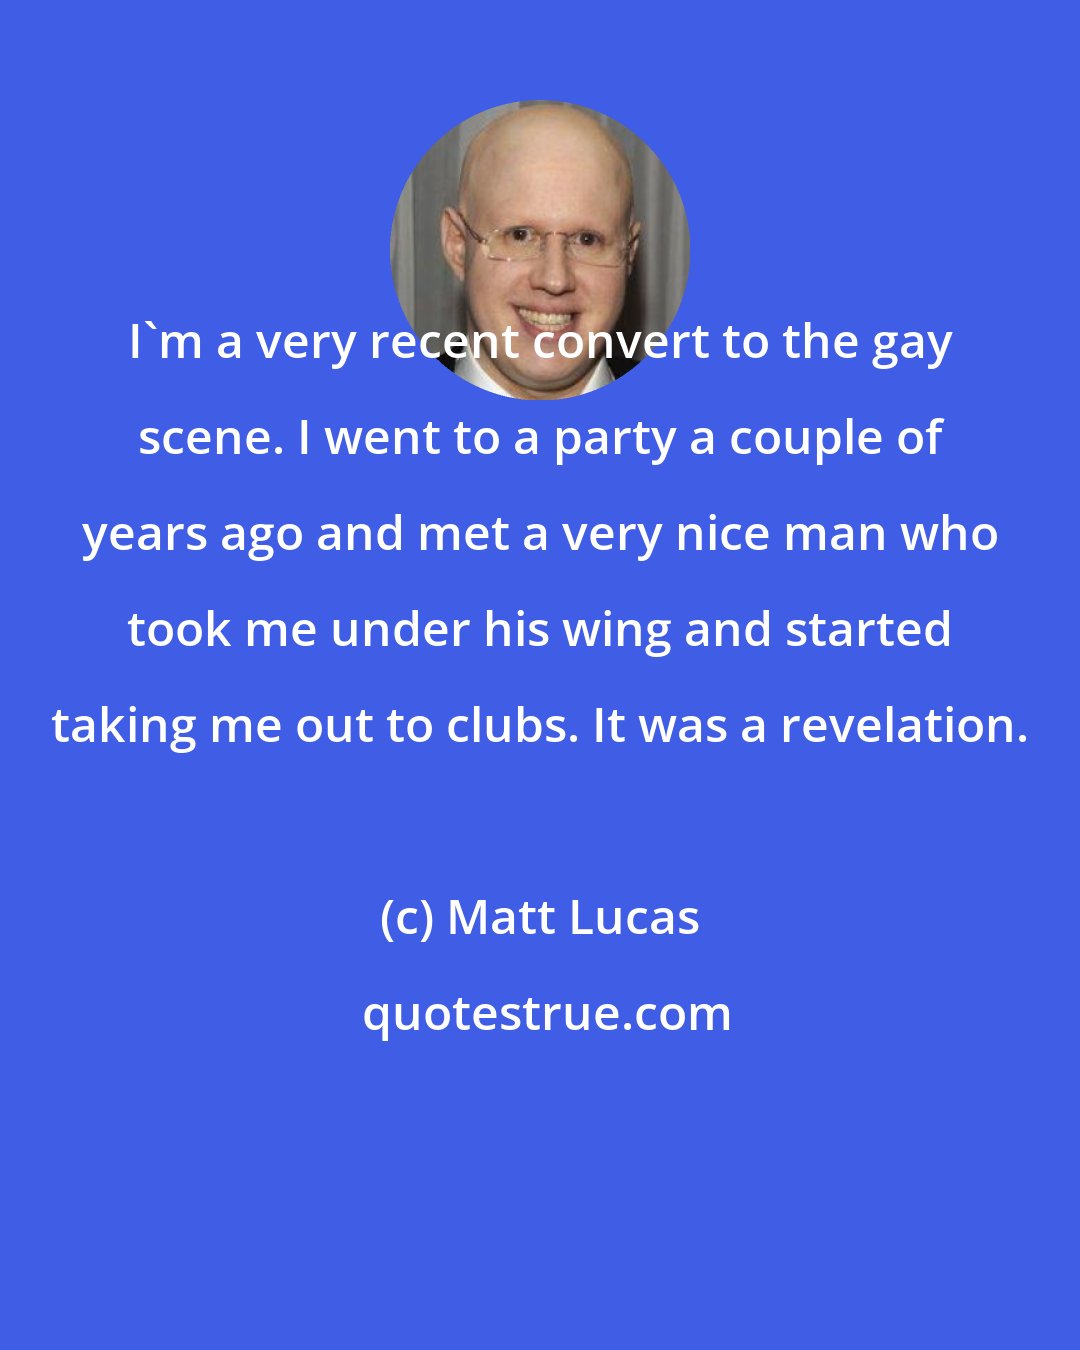 Matt Lucas: I'm a very recent convert to the gay scene. I went to a party a couple of years ago and met a very nice man who took me under his wing and started taking me out to clubs. It was a revelation.